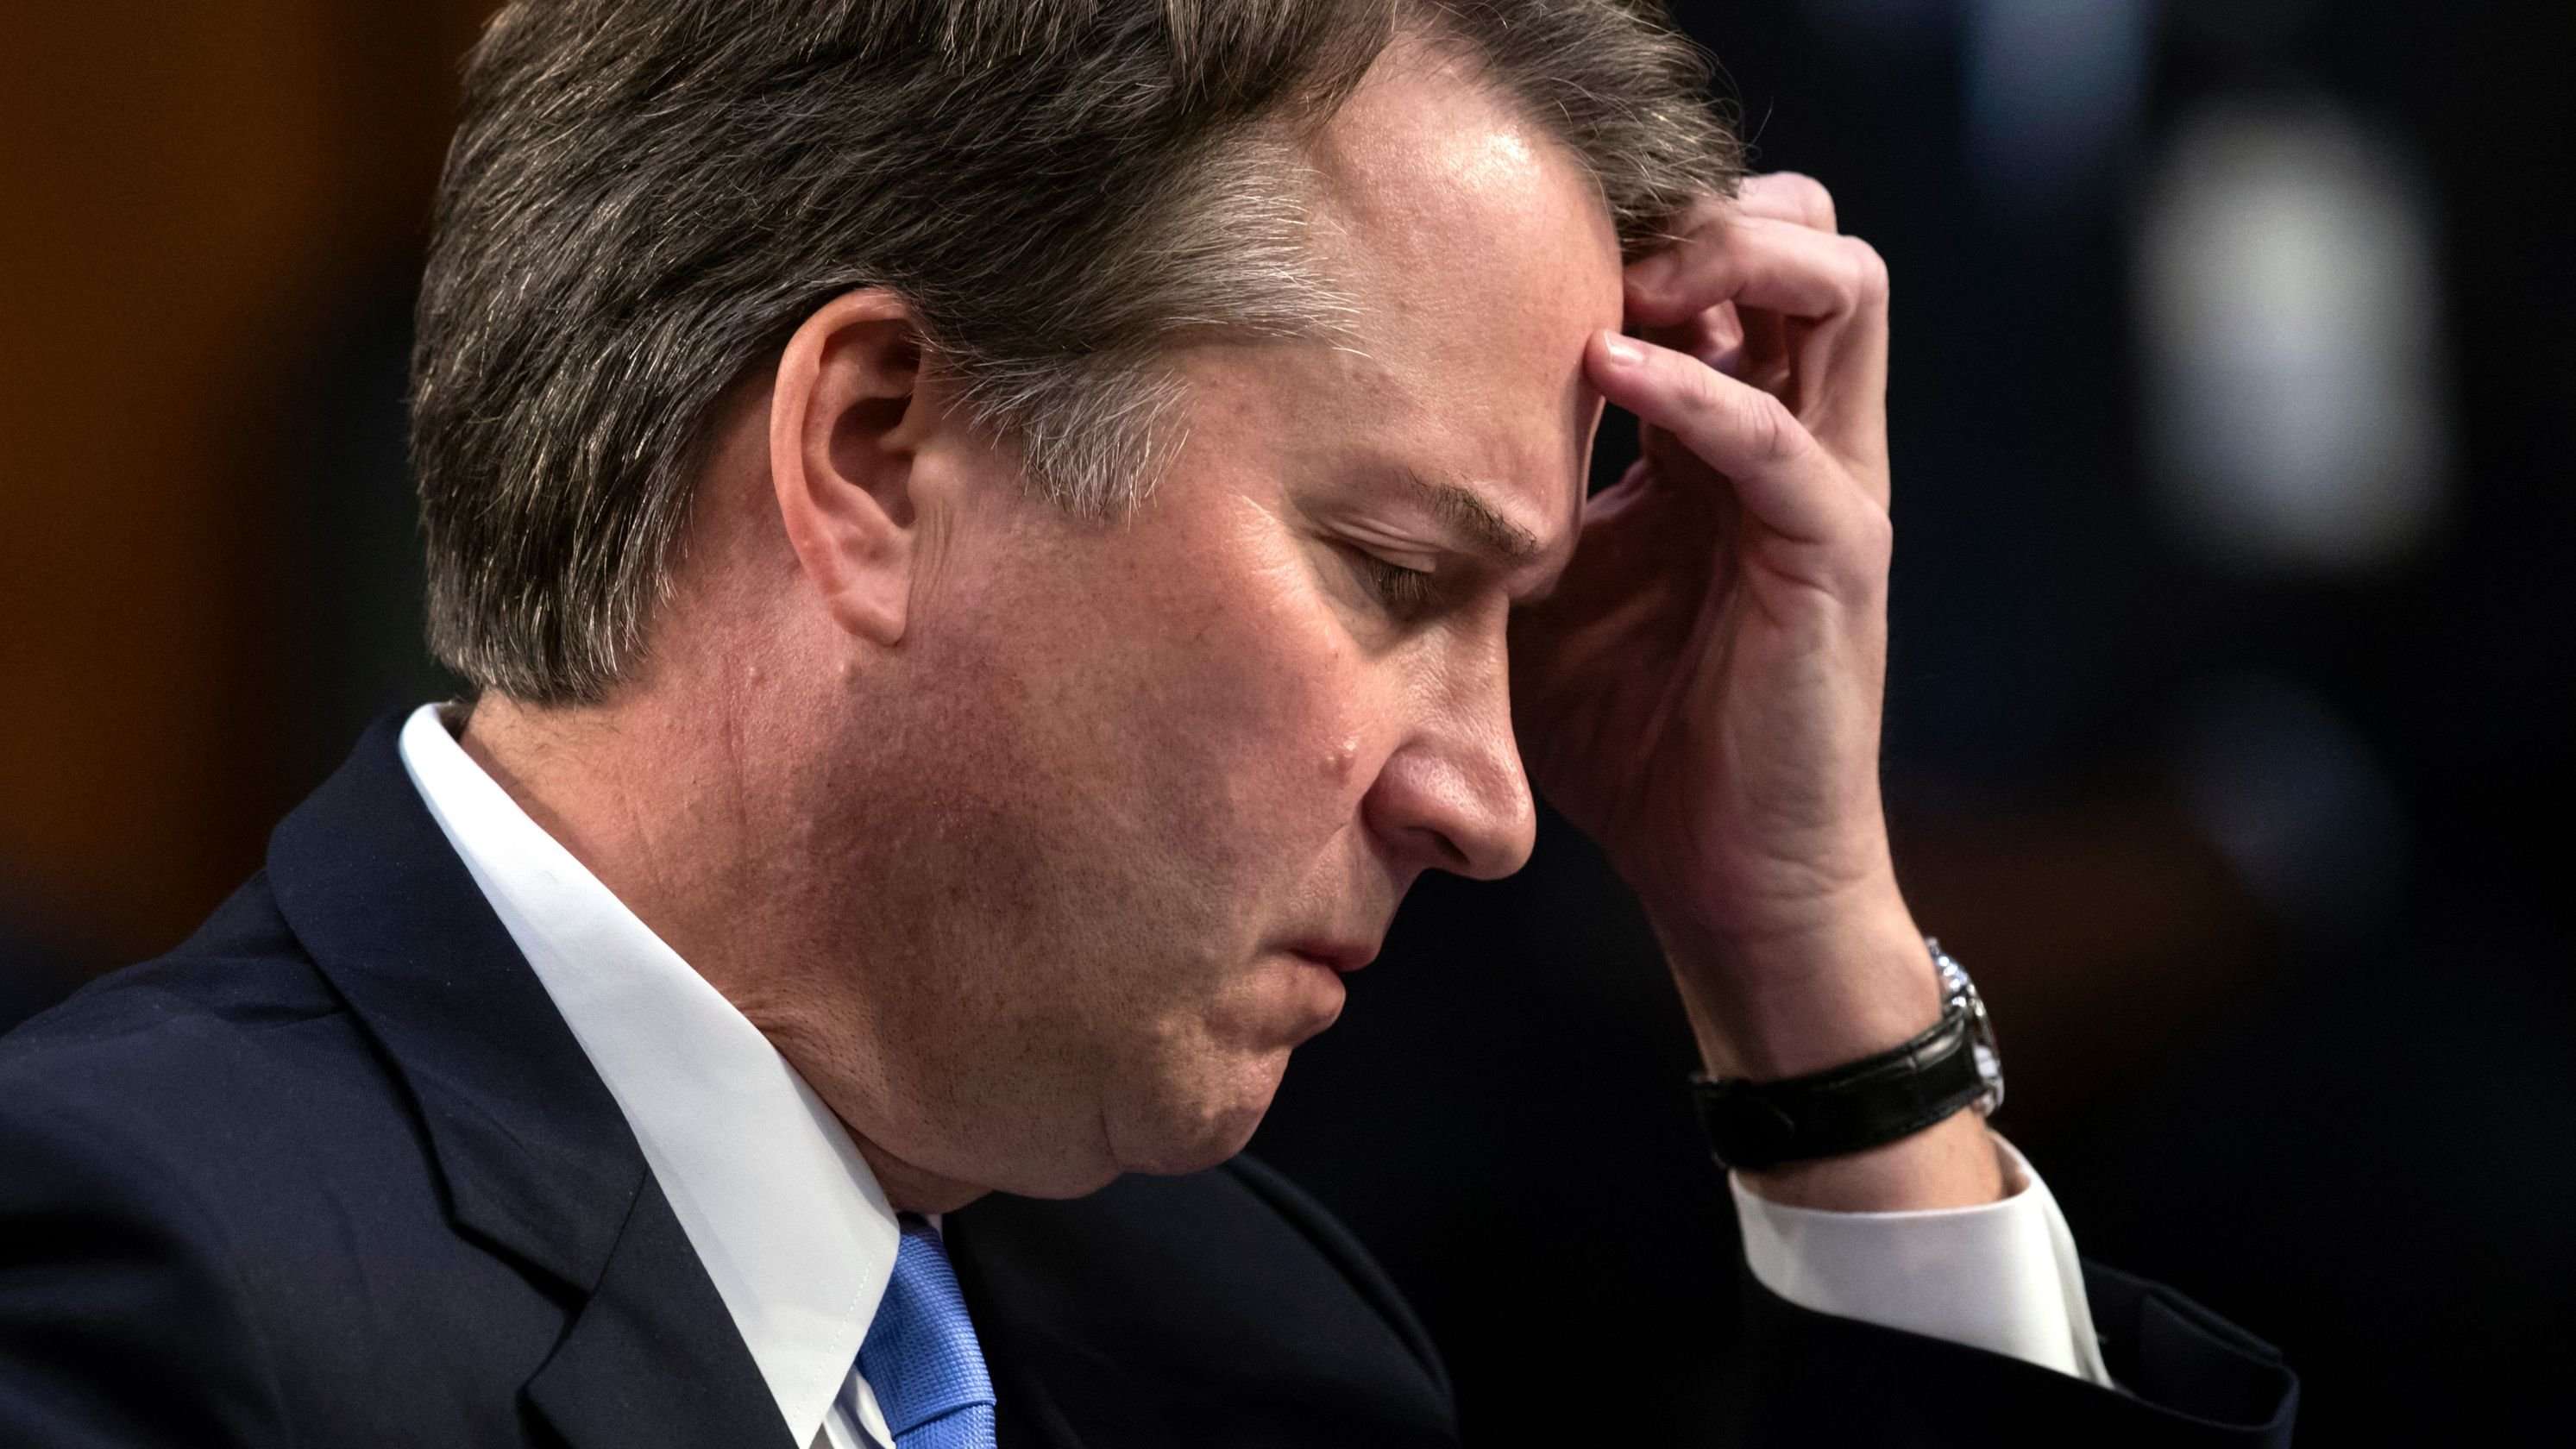 image for 'Uncontrollable male passion': Writings of Brett Kavanaugh's classmate under scrutiny